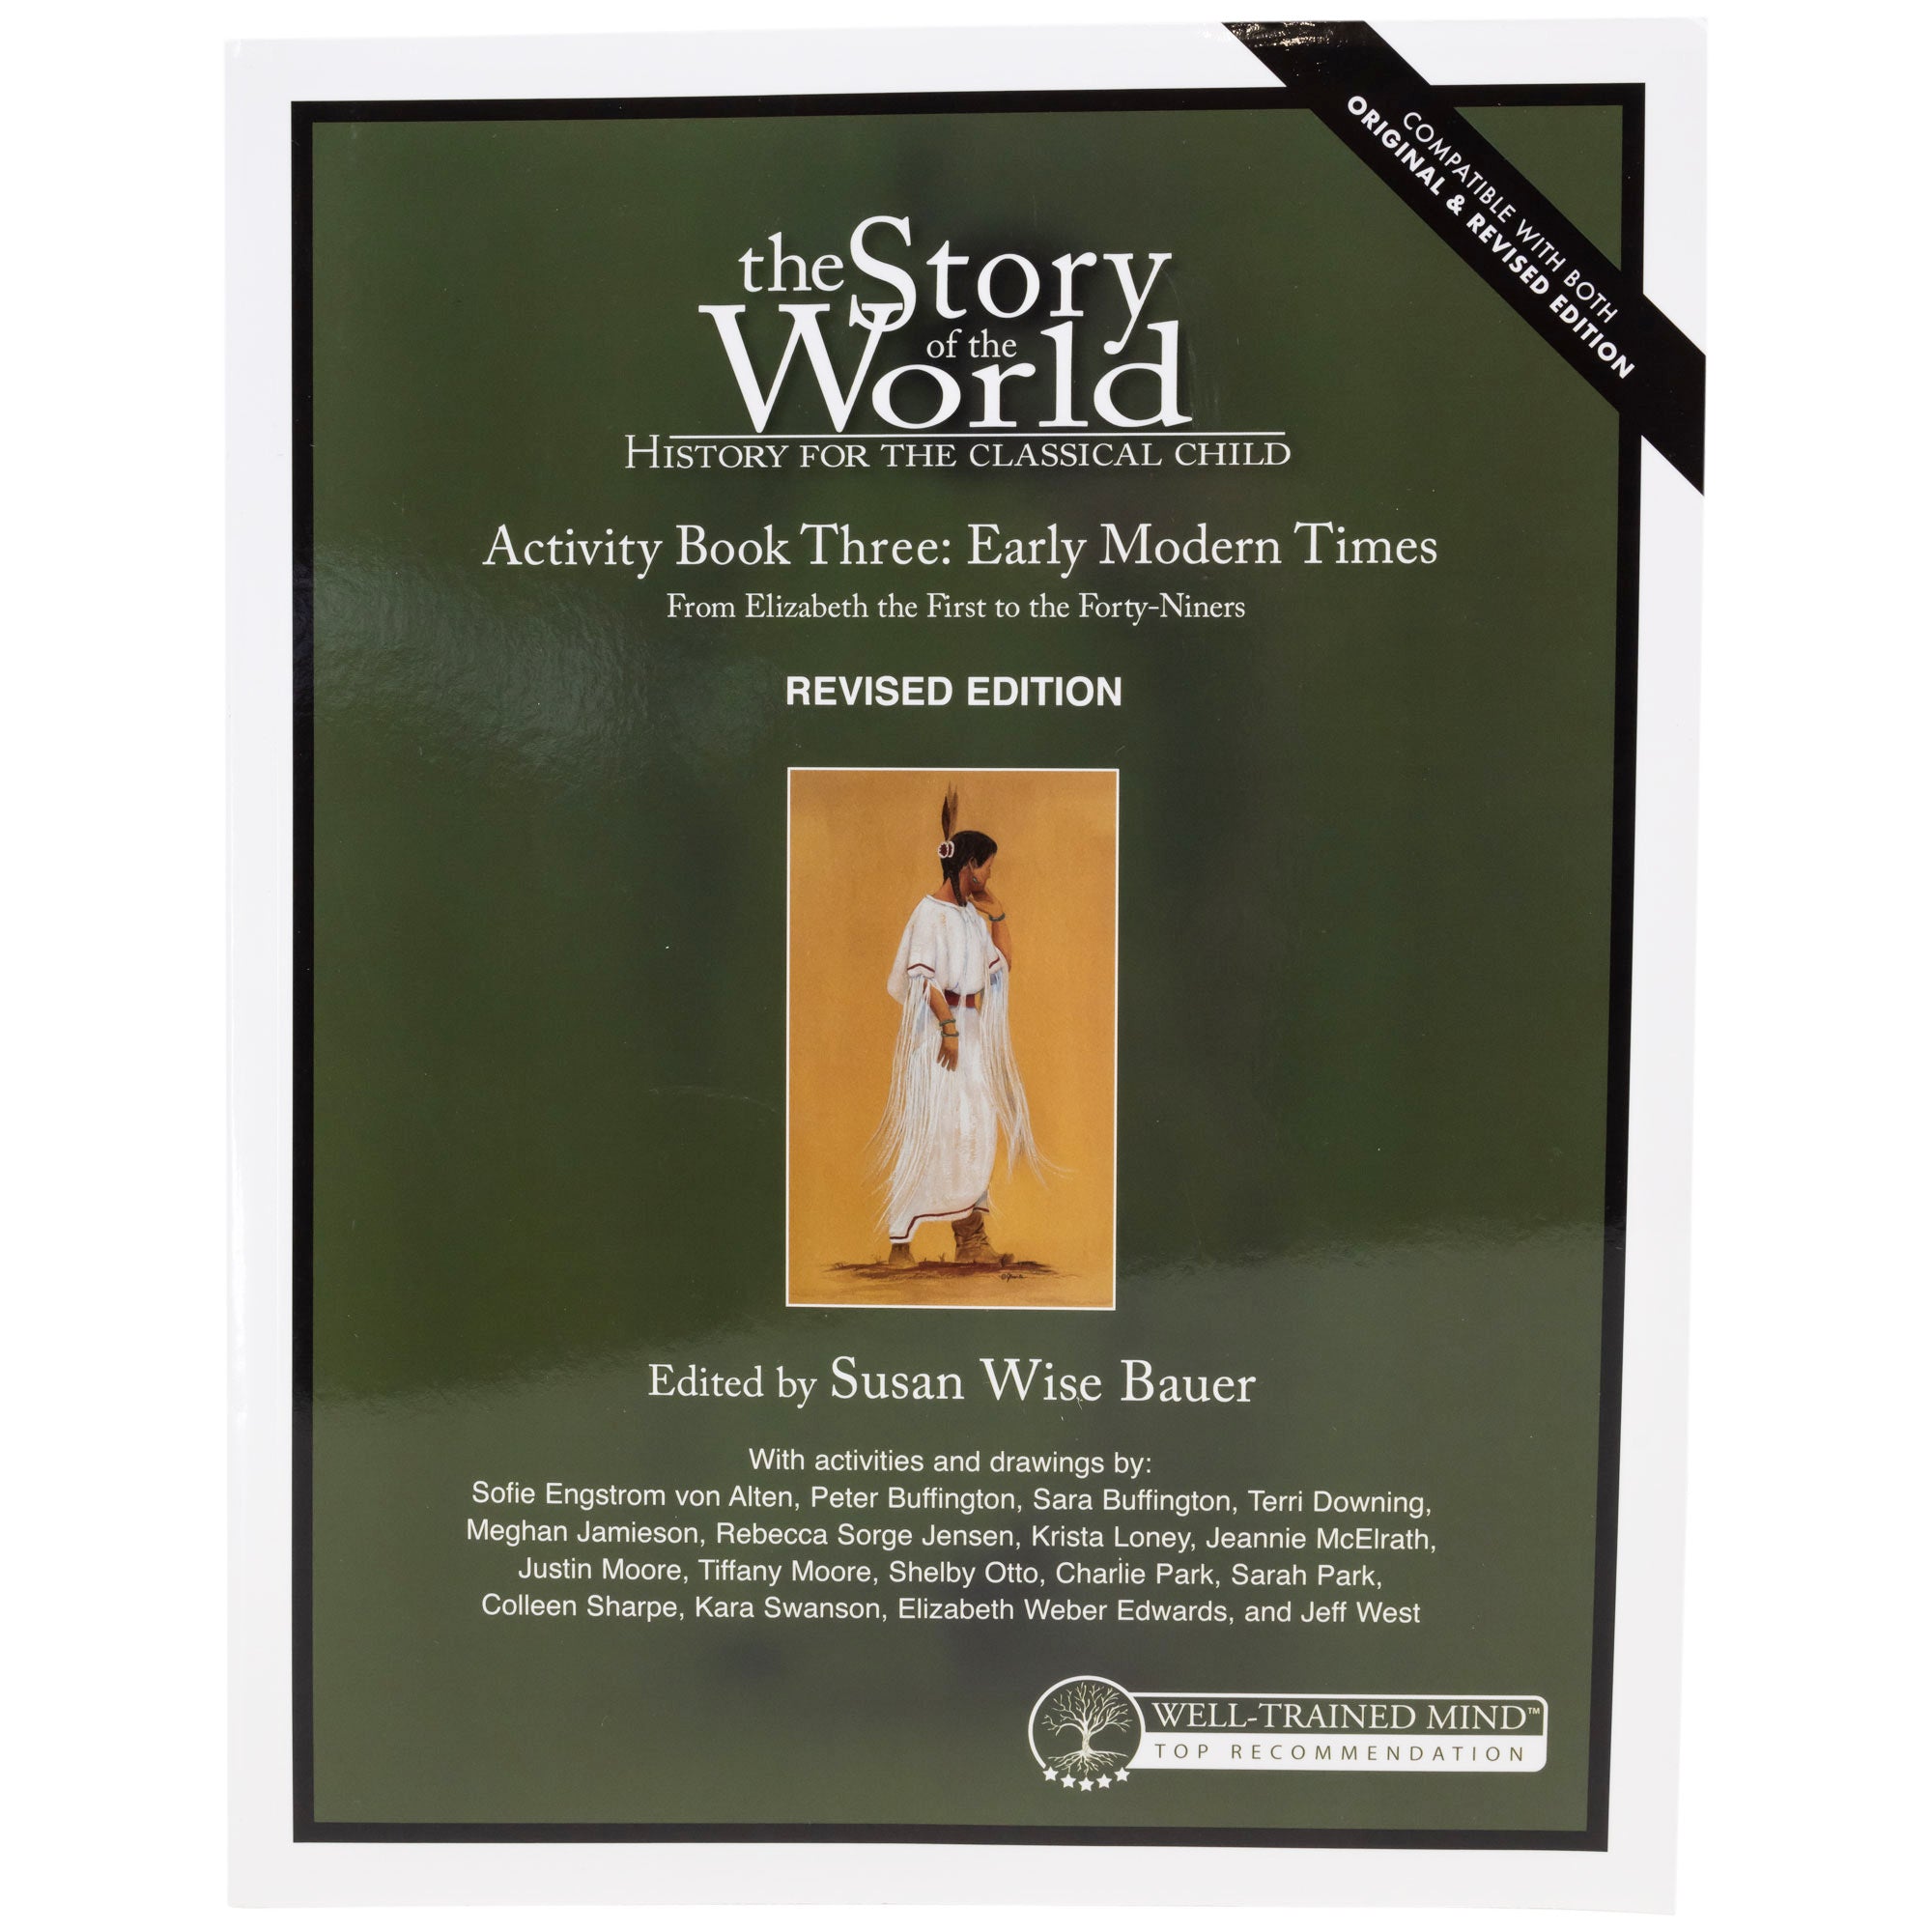 The Story of the World 3 Activity book cover. The cover is mainly green with a black bottom and a small illustration of a Native American woman in a white dress in the middle. The white text reads “The Story of the World. History for the classical child. Activity book 3, Early Modern Times. From Elizabeth the First to the Forty-Niners. Revised Edition. Edited by Susan Wise Bauer.”